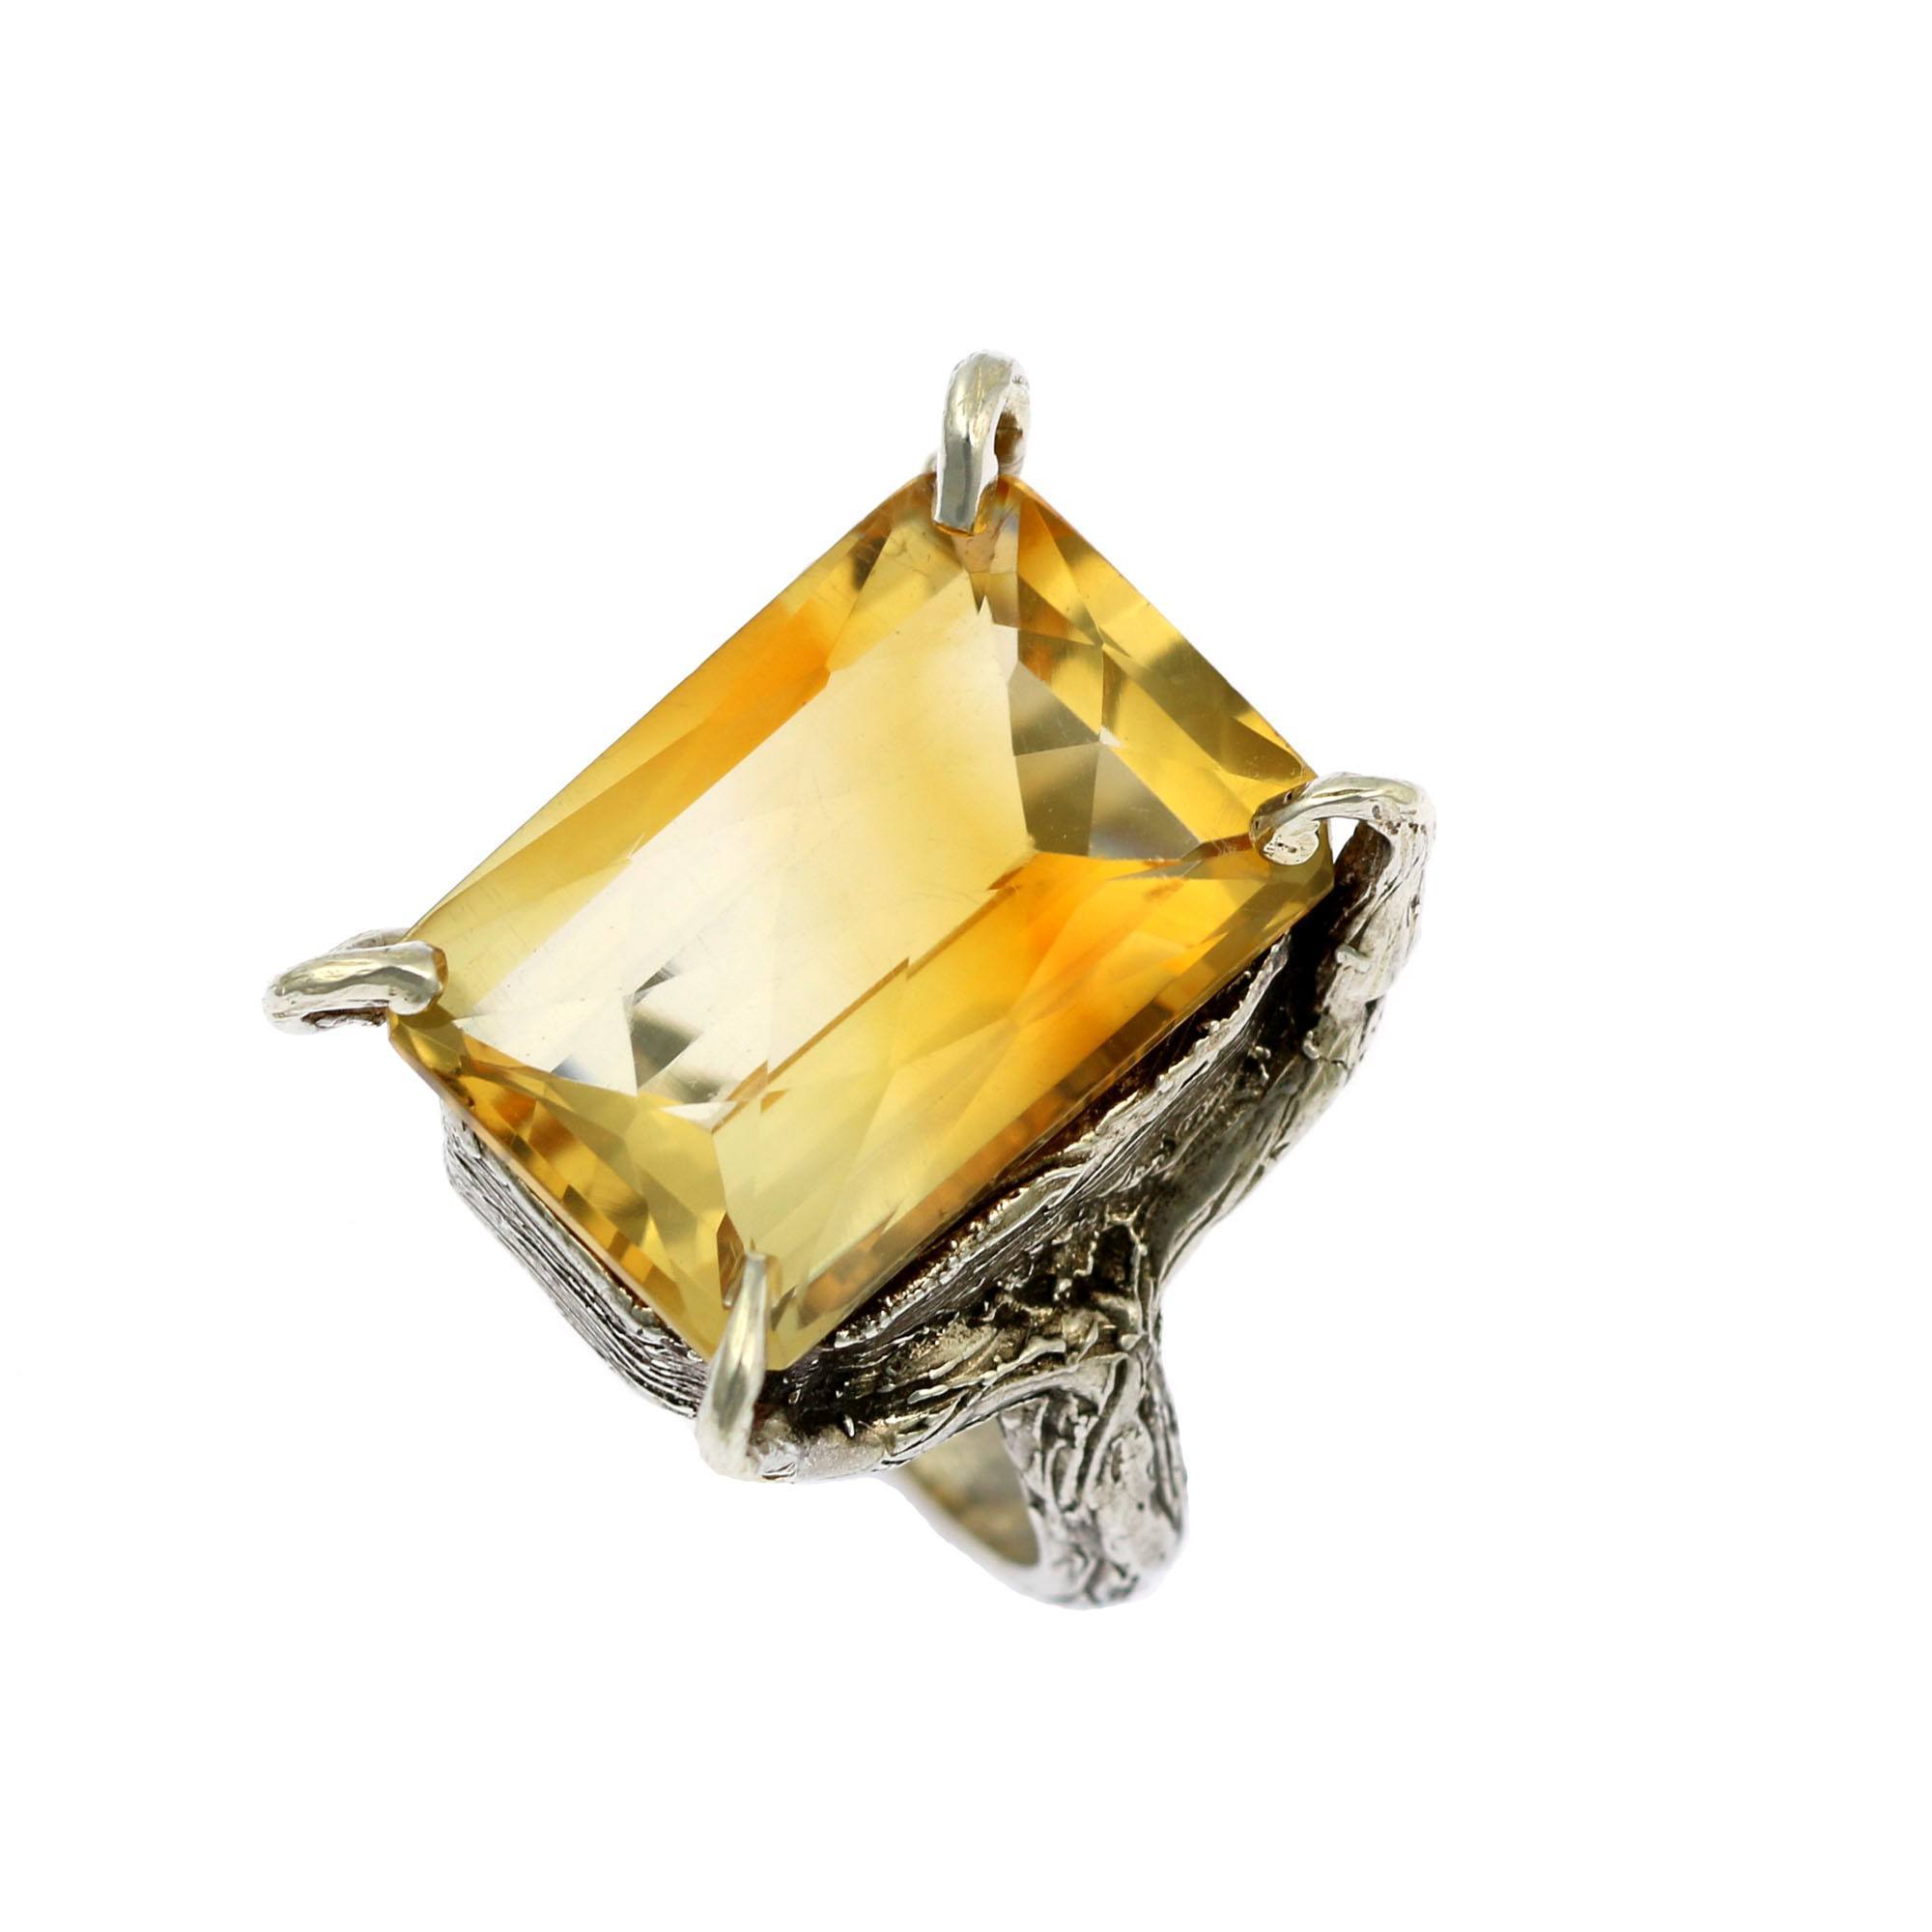 Size View of Citrine Sterling Silver Cocktail Ring